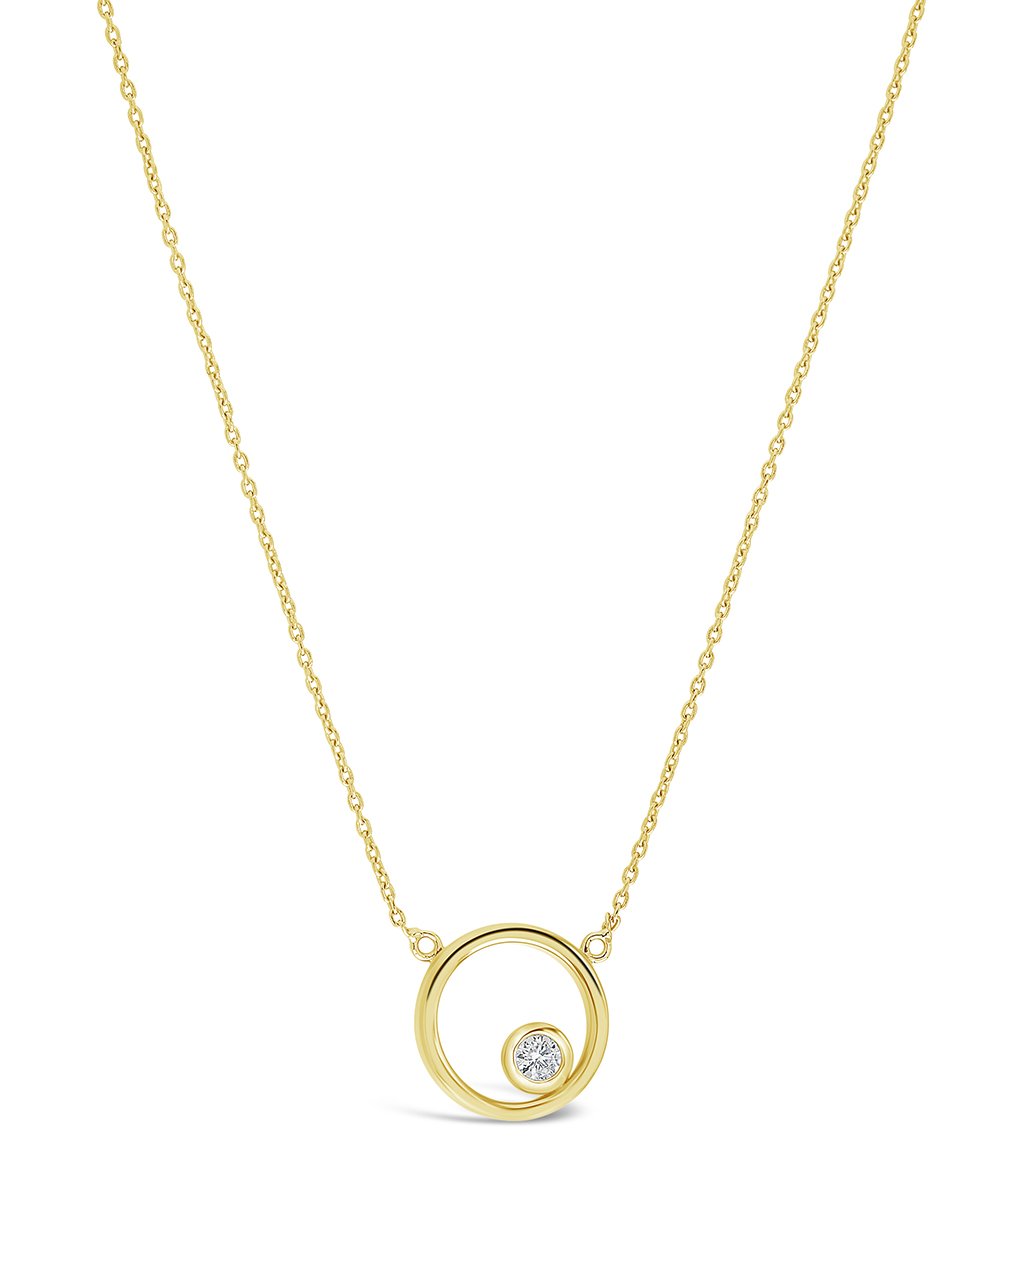 Sterling Silver Circle Pendant Necklace with CZ Stud - Sterling Forever